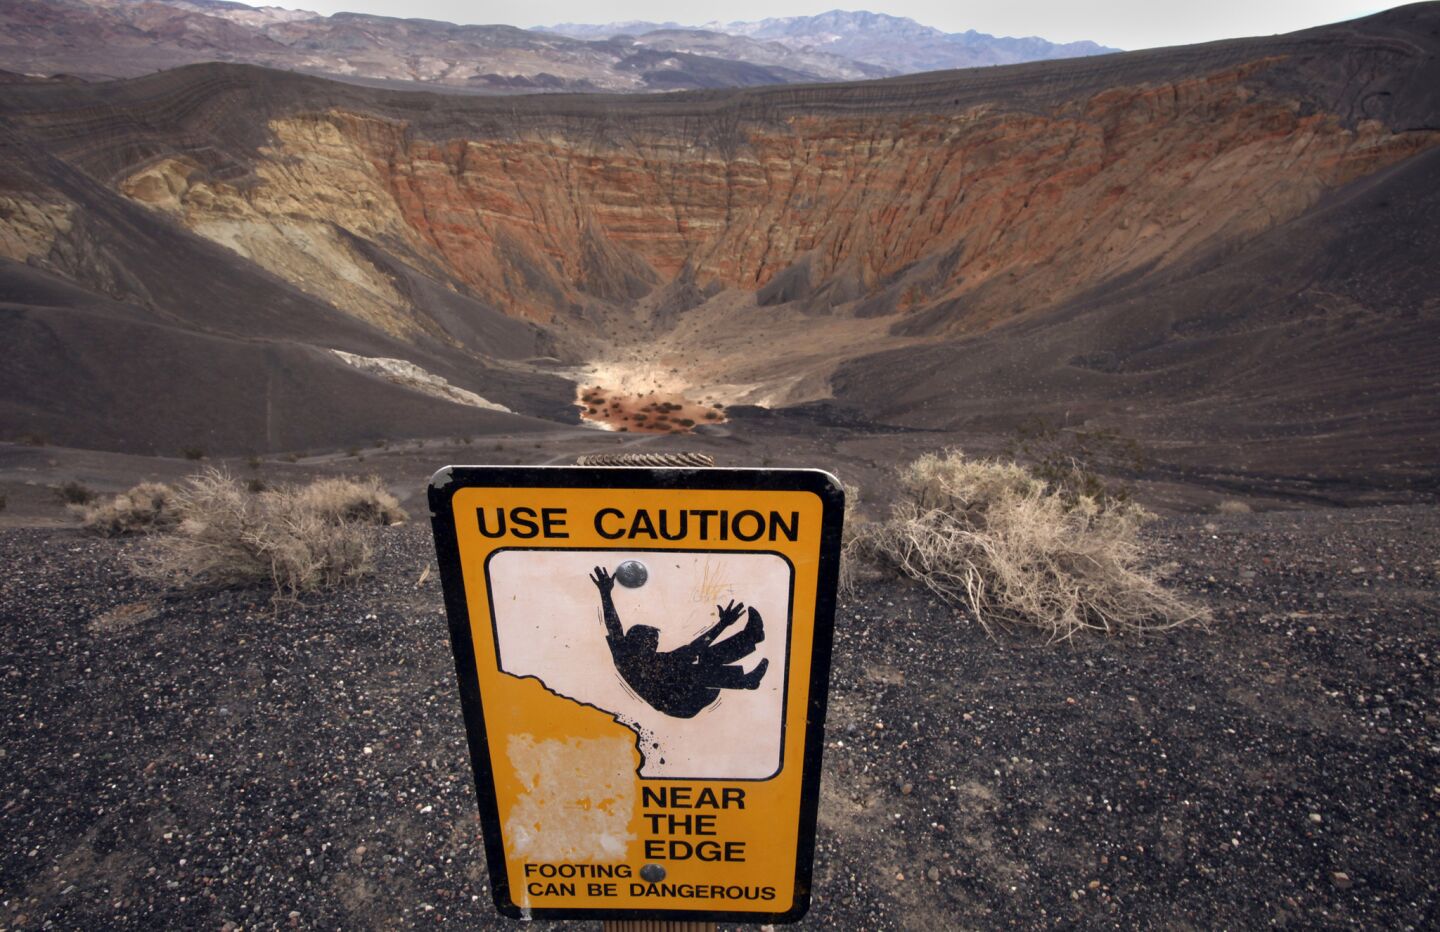 The 600-foot deep Ubehebe Crater is located in the northern area of Death Valley, where a powerful volcanic steam explosion created the the colorful hole in the ground suitable for hiking.